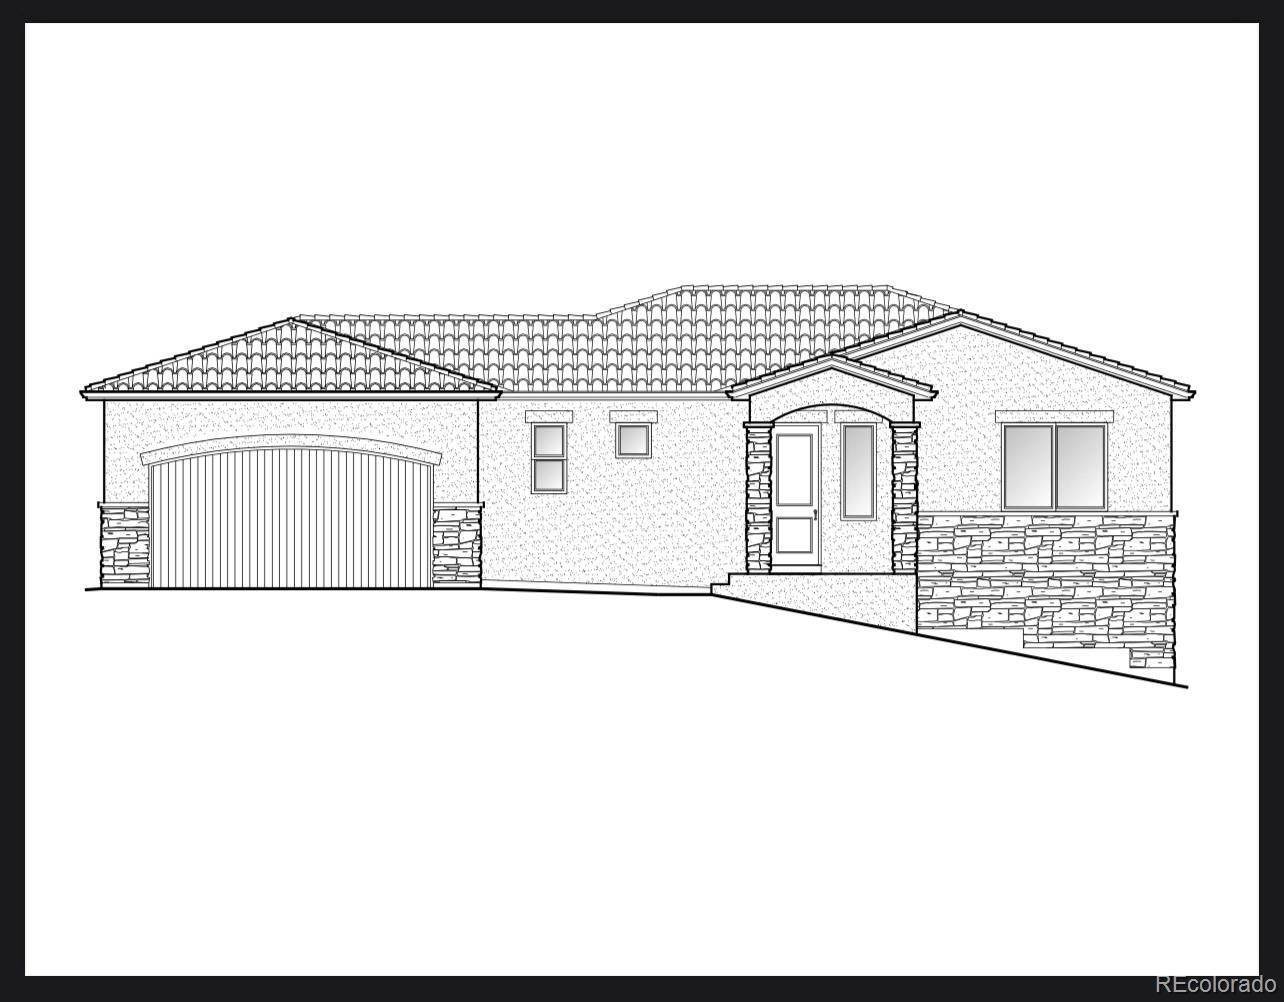 2. Single Family Homes for Sale at 1954 Lone Willow View Colorado Springs, Colorado 80904 United States